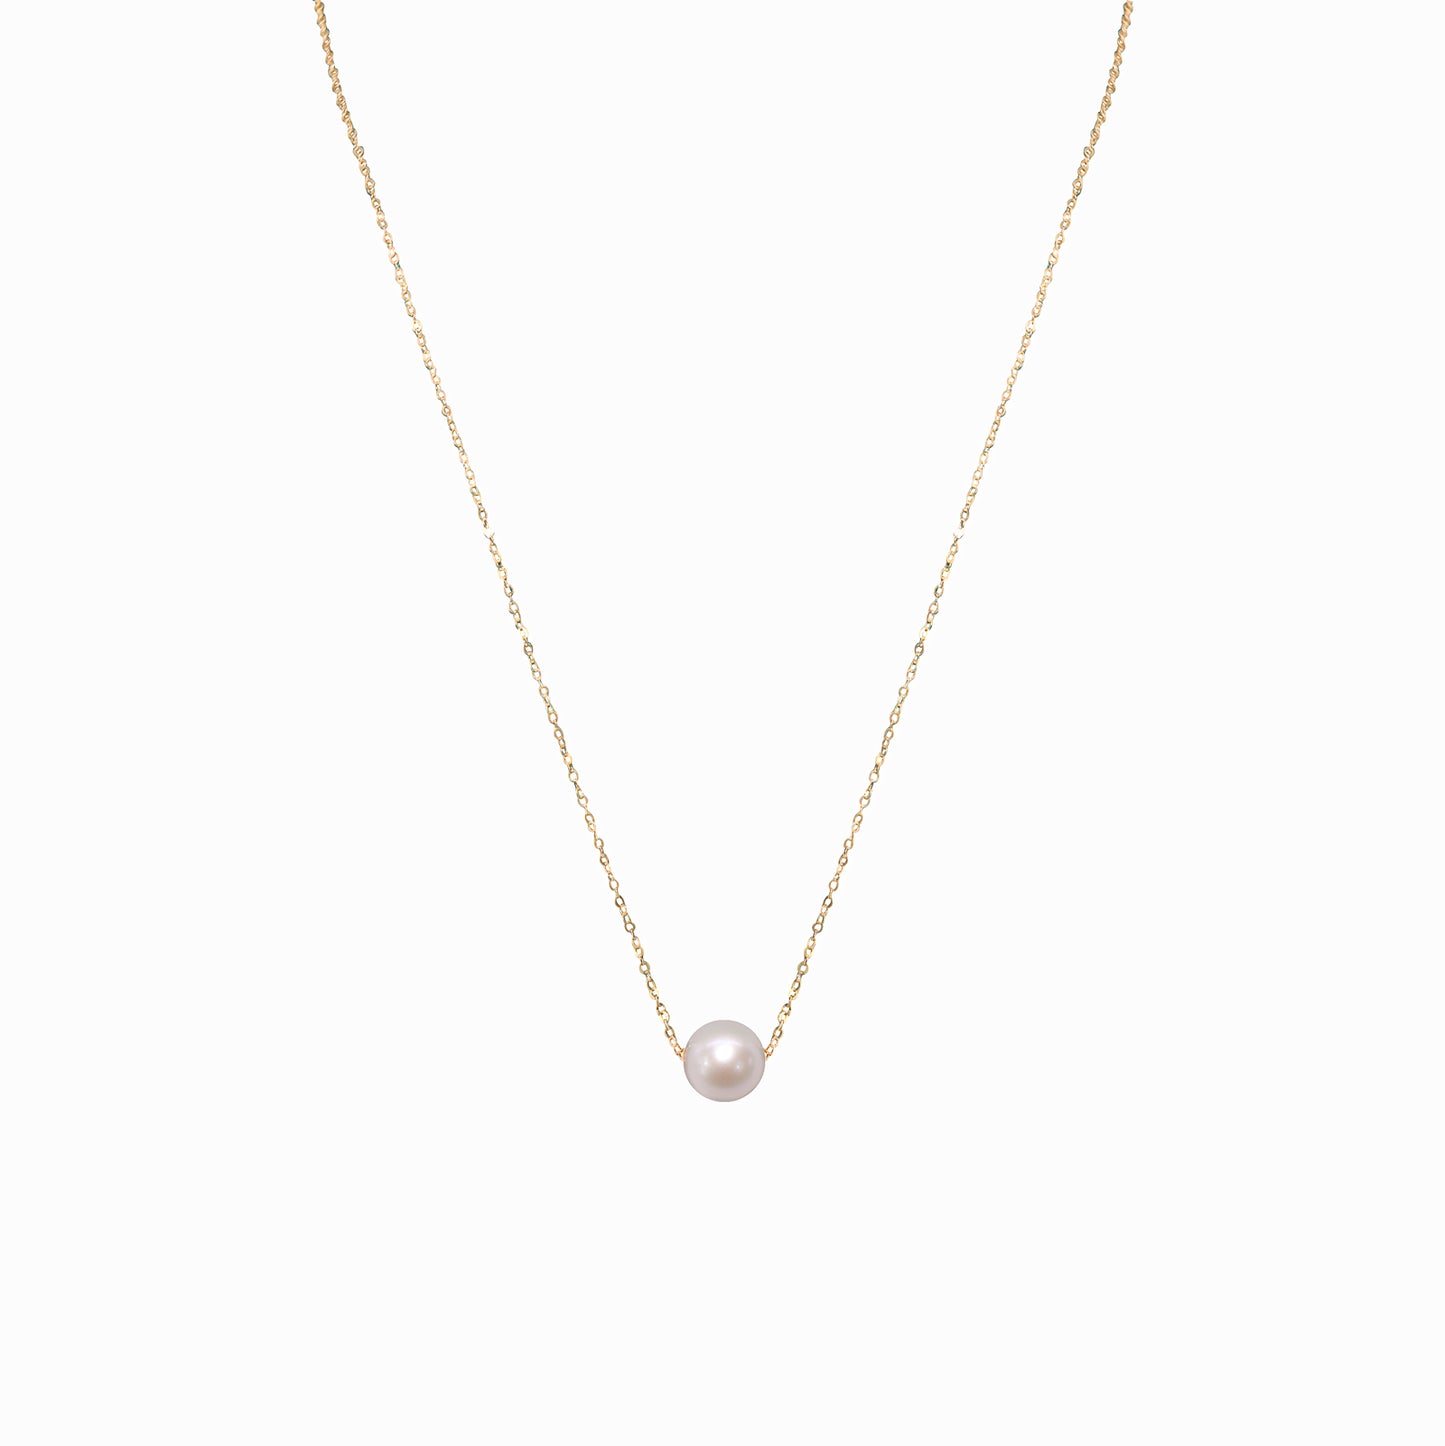 18K Gold Pearl Necklace 8-8.5 mm